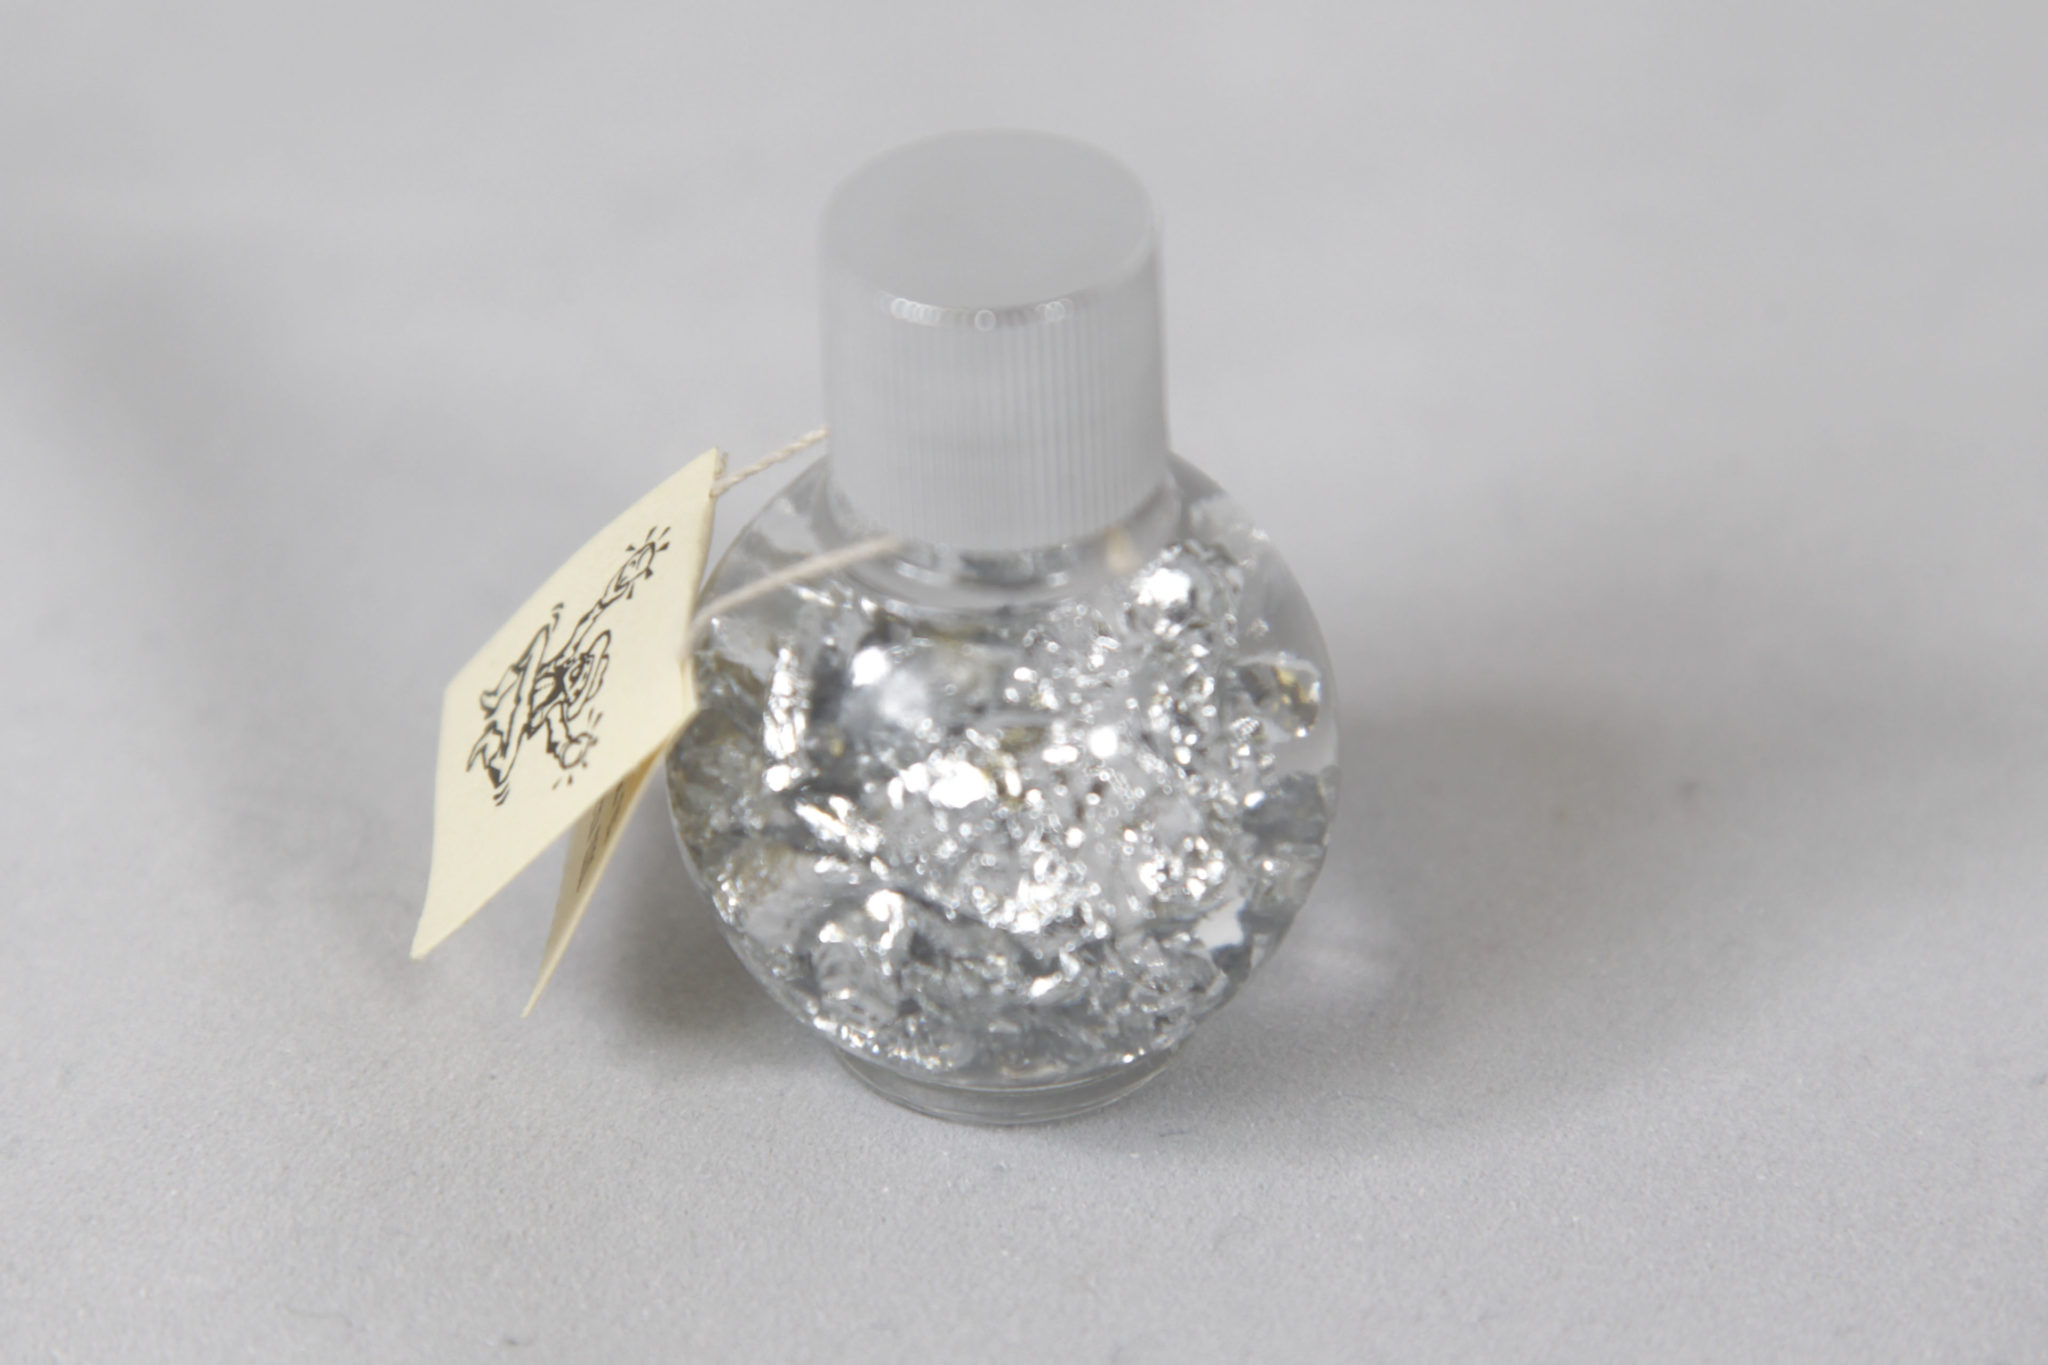 Real Silver Flake Non-Toxic Certified from Brazil - Kids Love Rocks